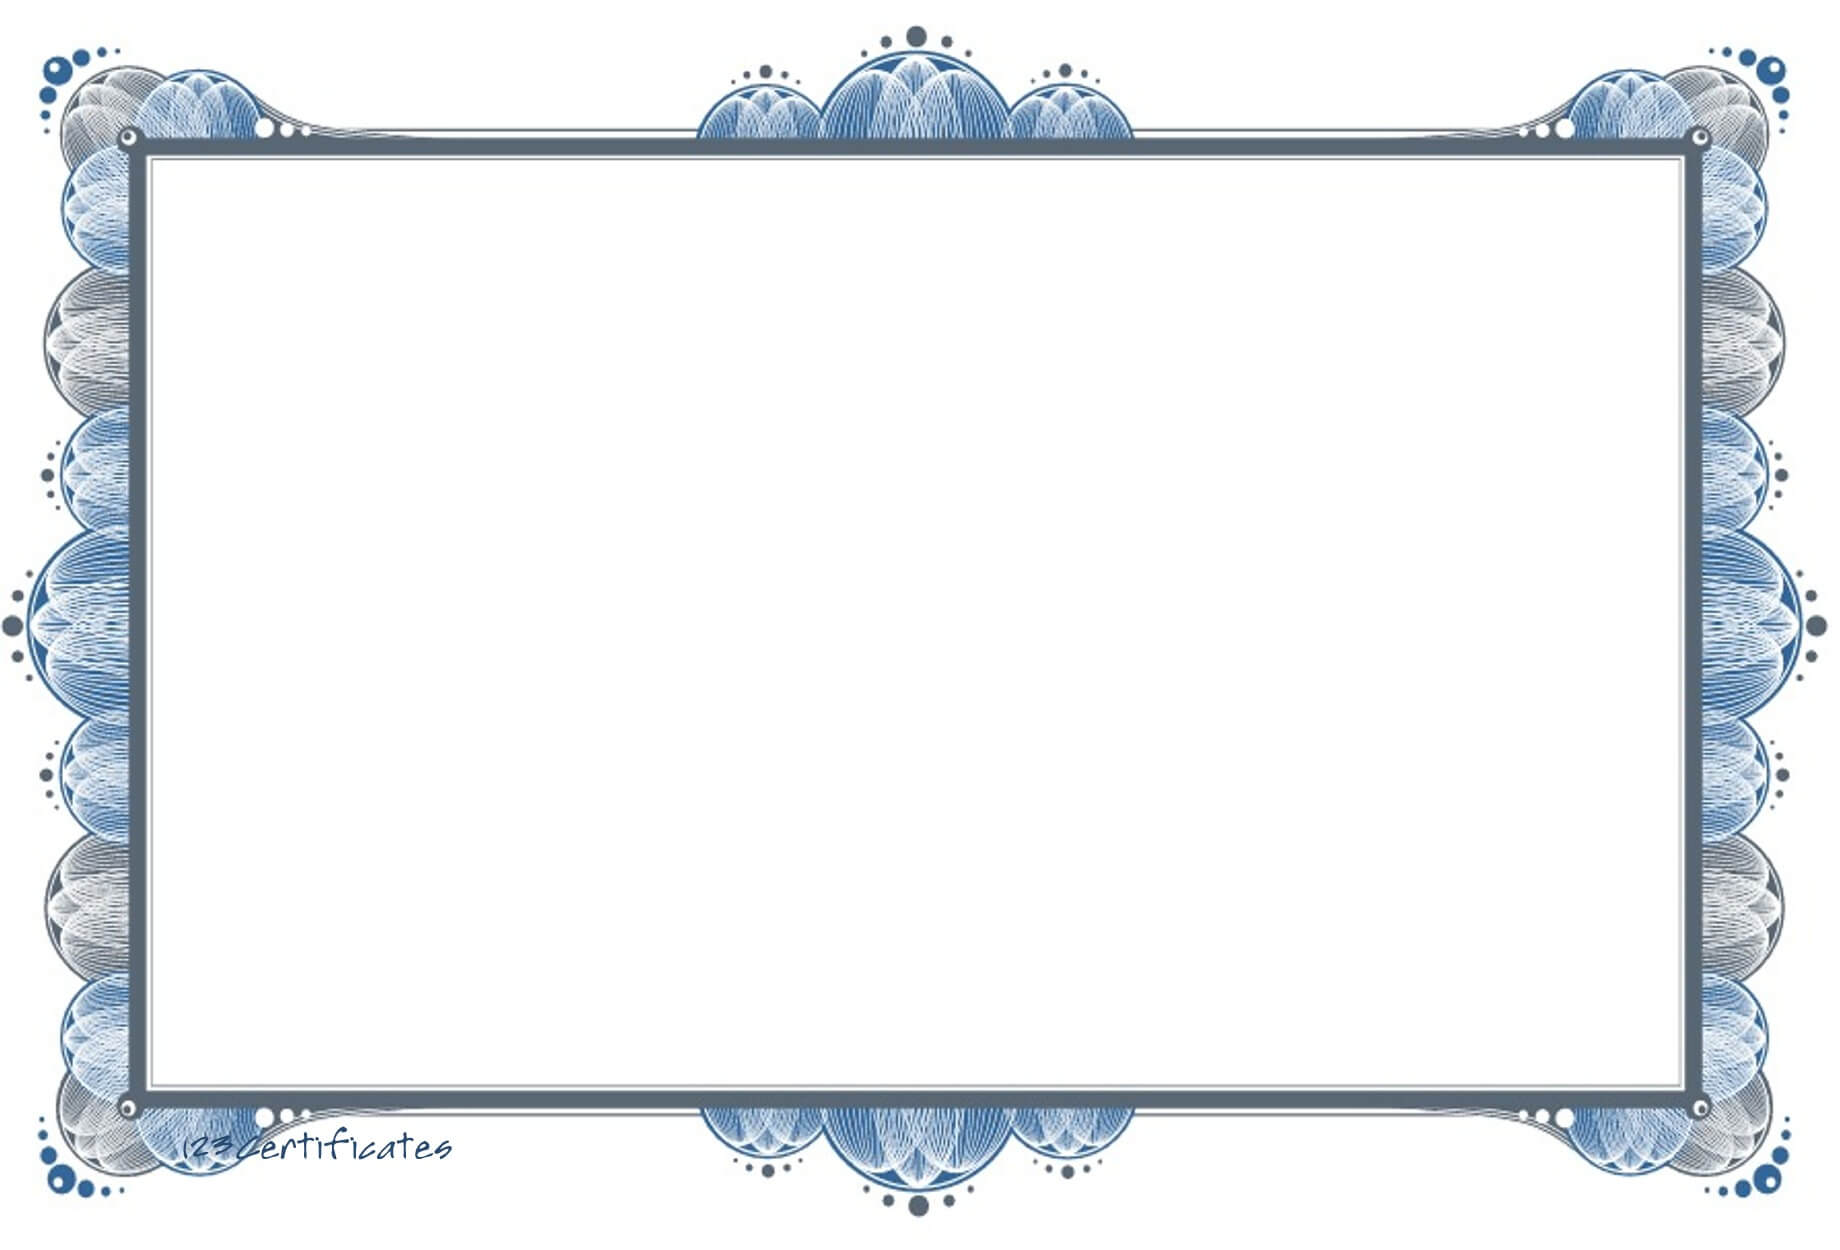 Free Certificate Borders To Download In Certificate Border Design Templates